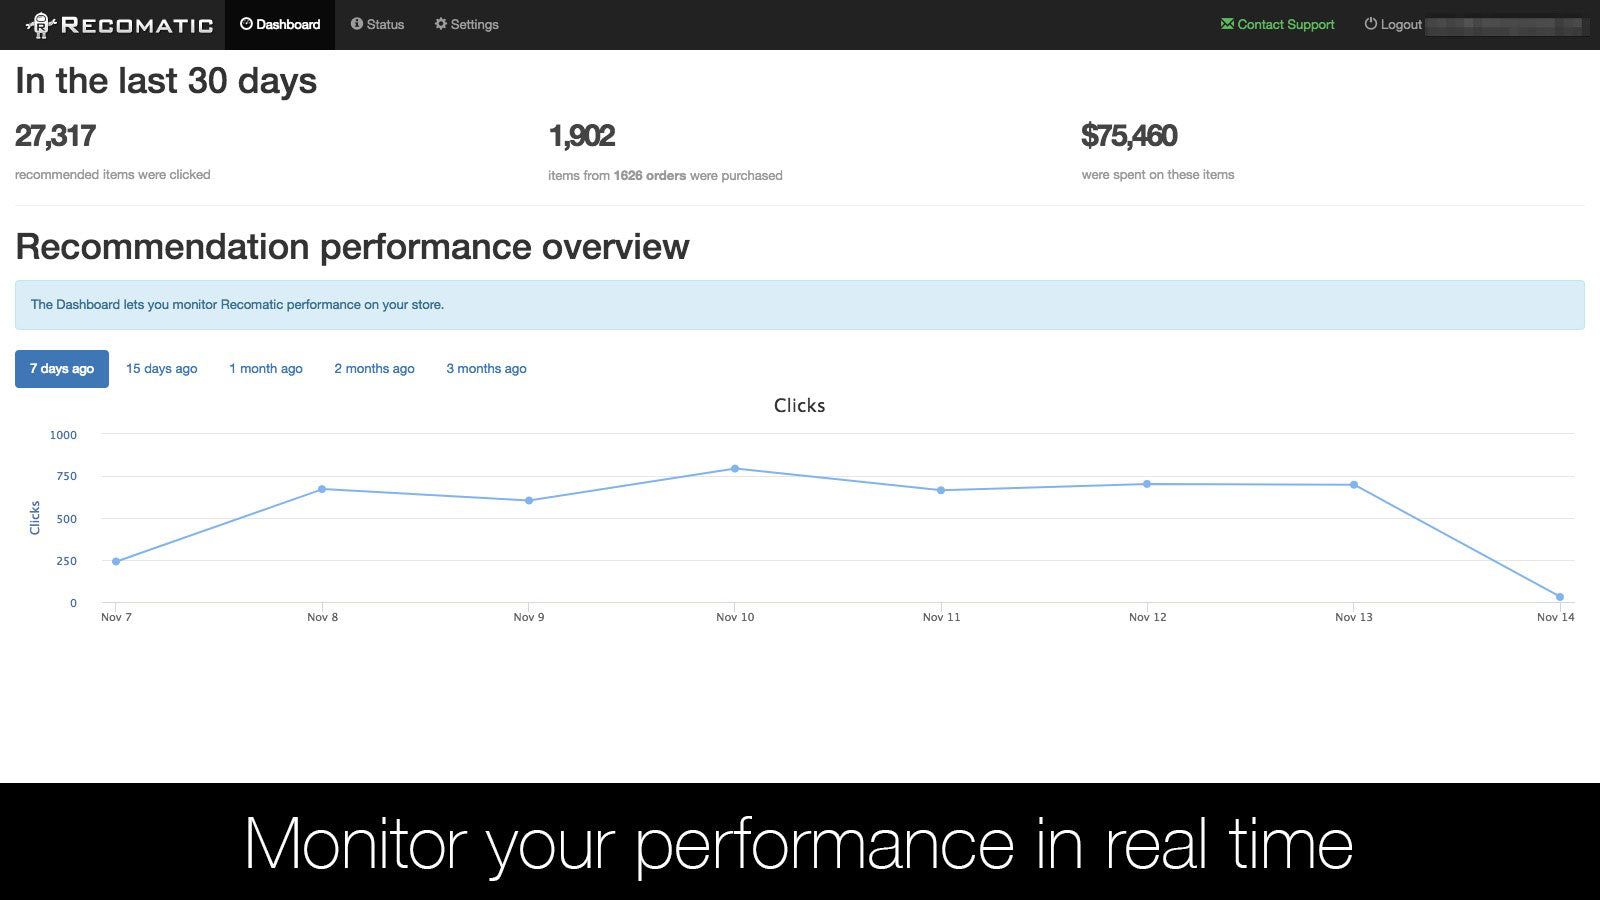 Monitor your performance in real time